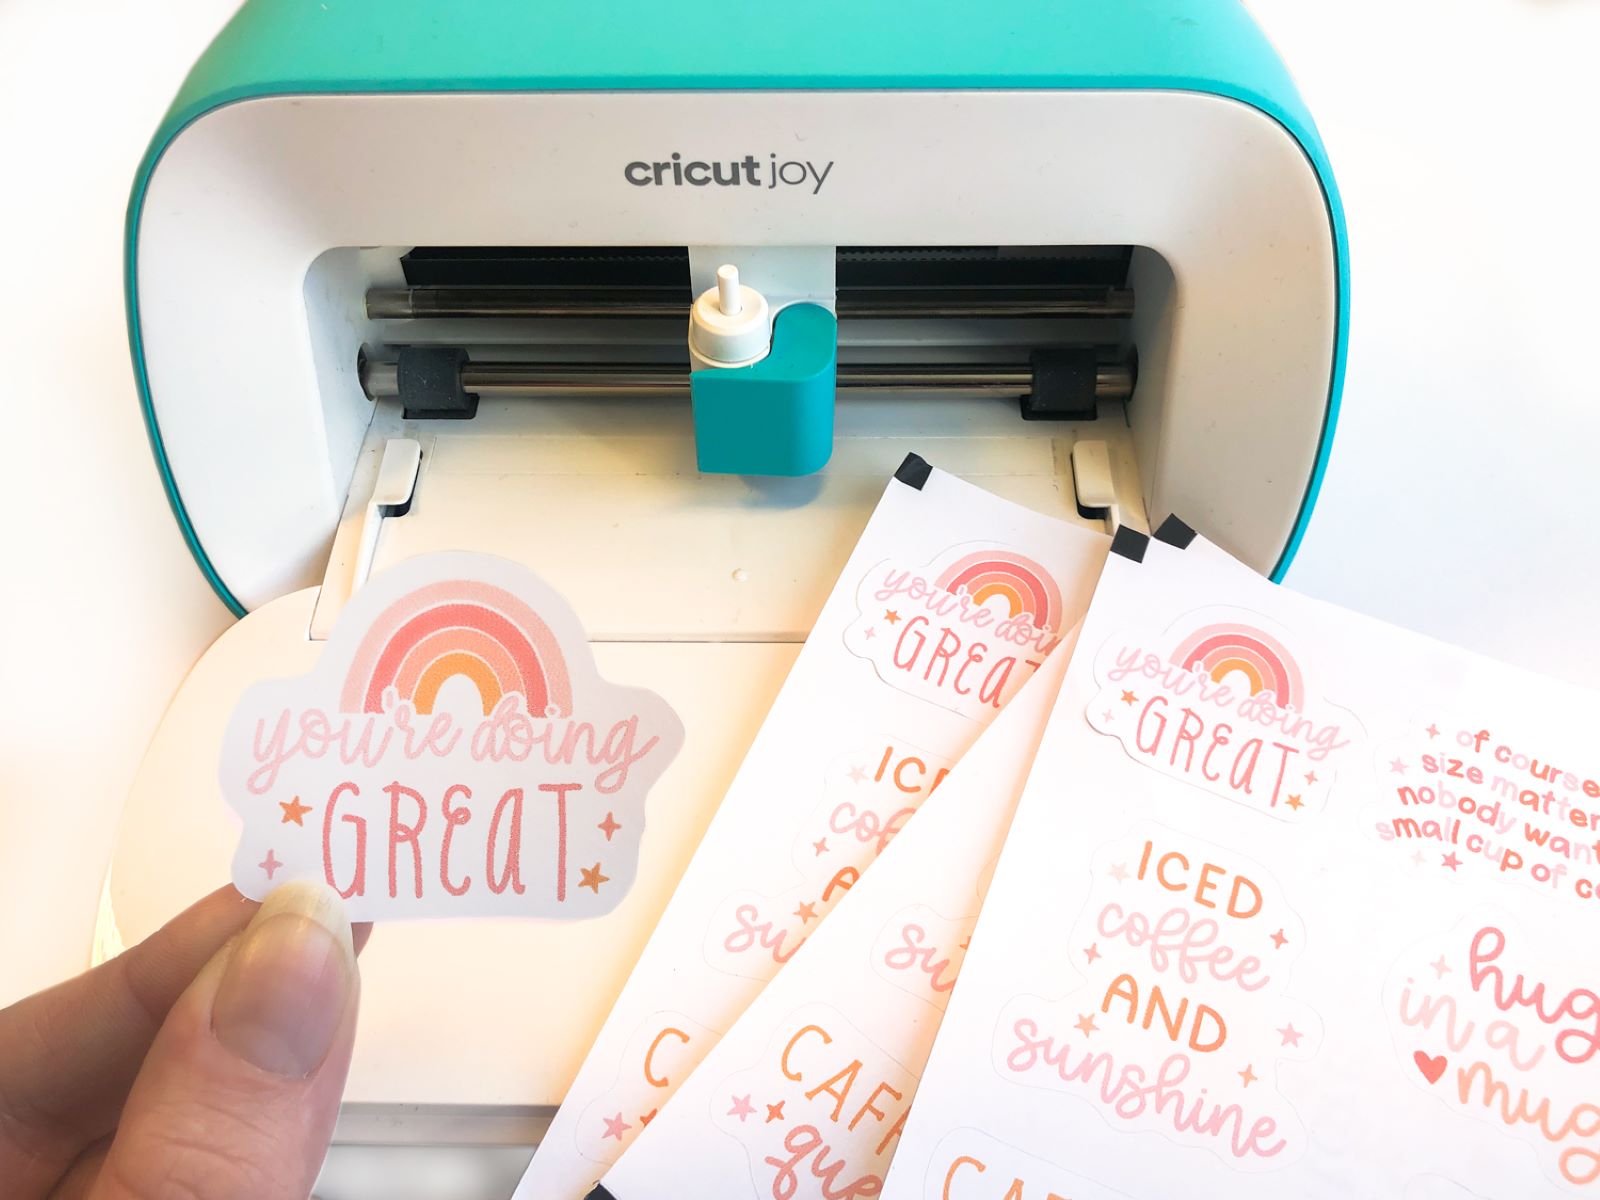 How To Add Printer To Cricut